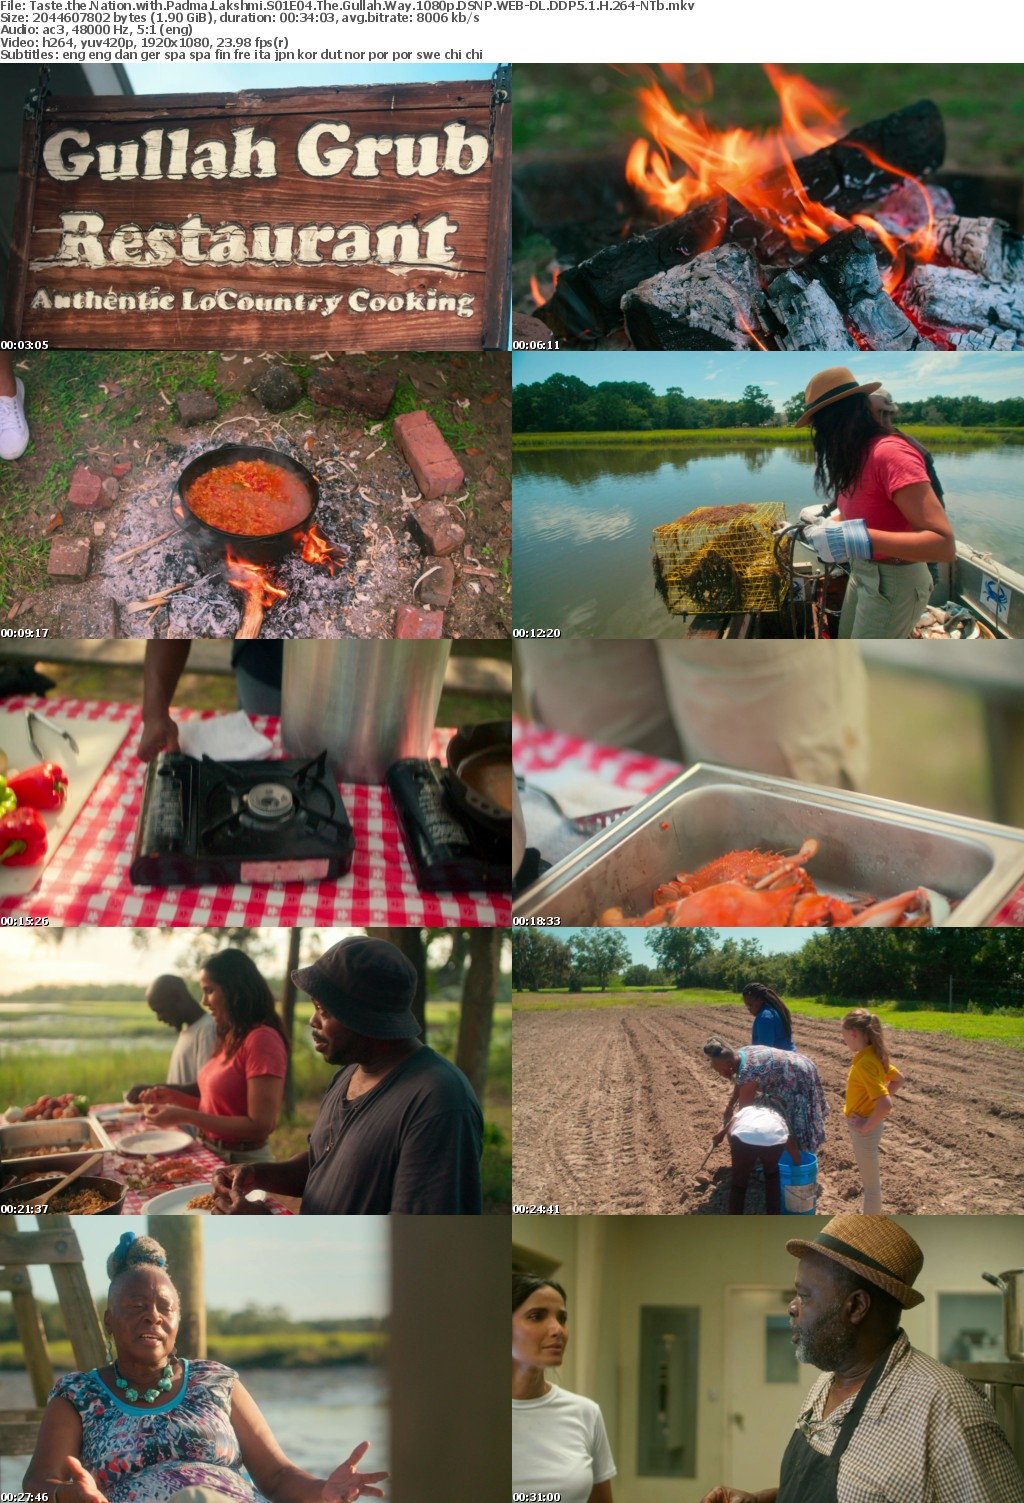 Taste the Nation with Padma Lakshmi S01E04 The Gullah Way 1080p DSNP WEB-DL DDP5 1 H 264-NTb